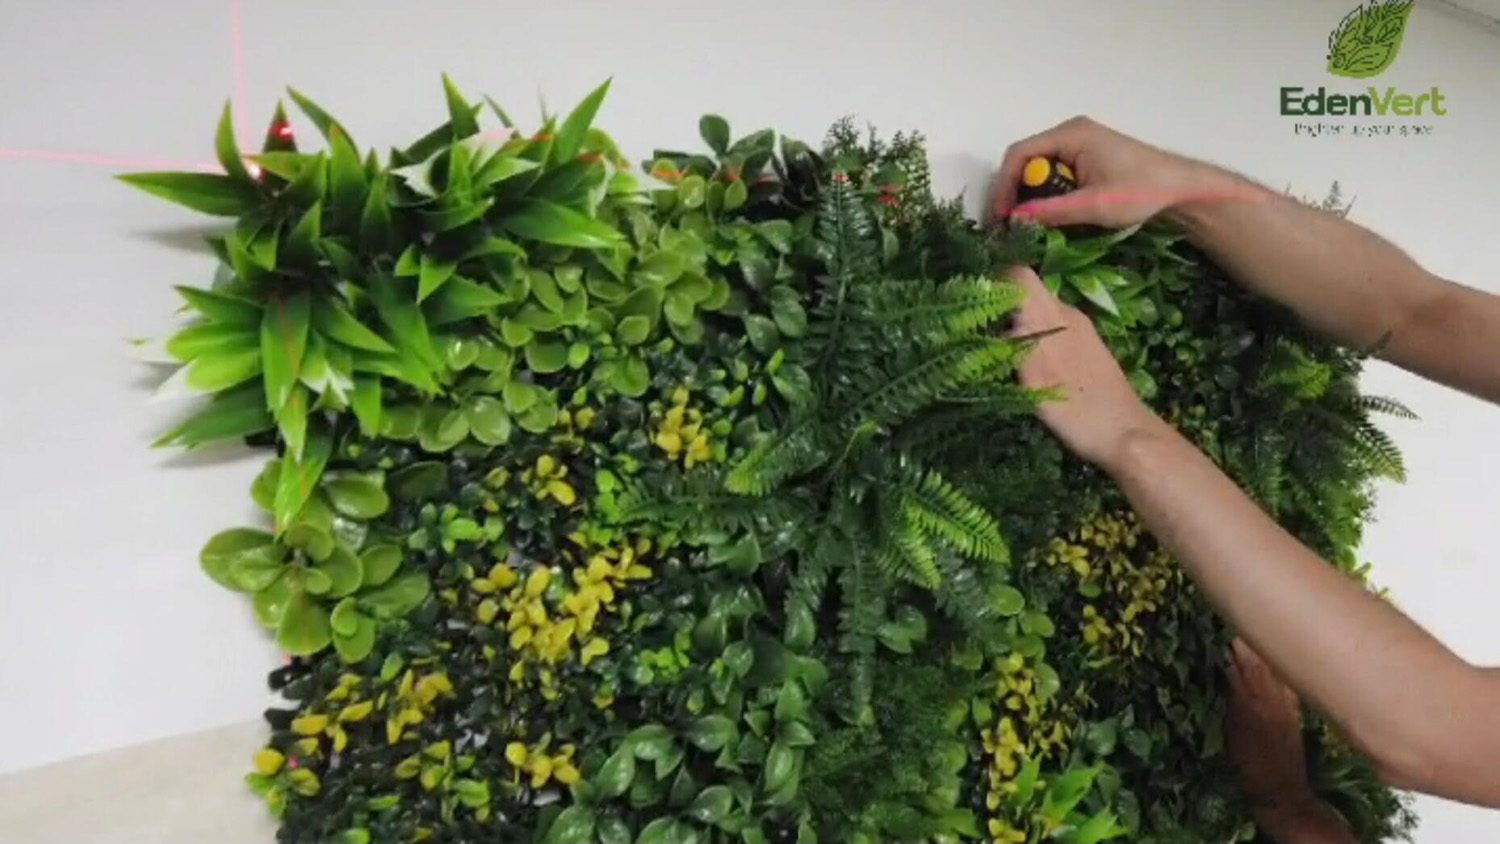 install arificial green wall for interior decoration